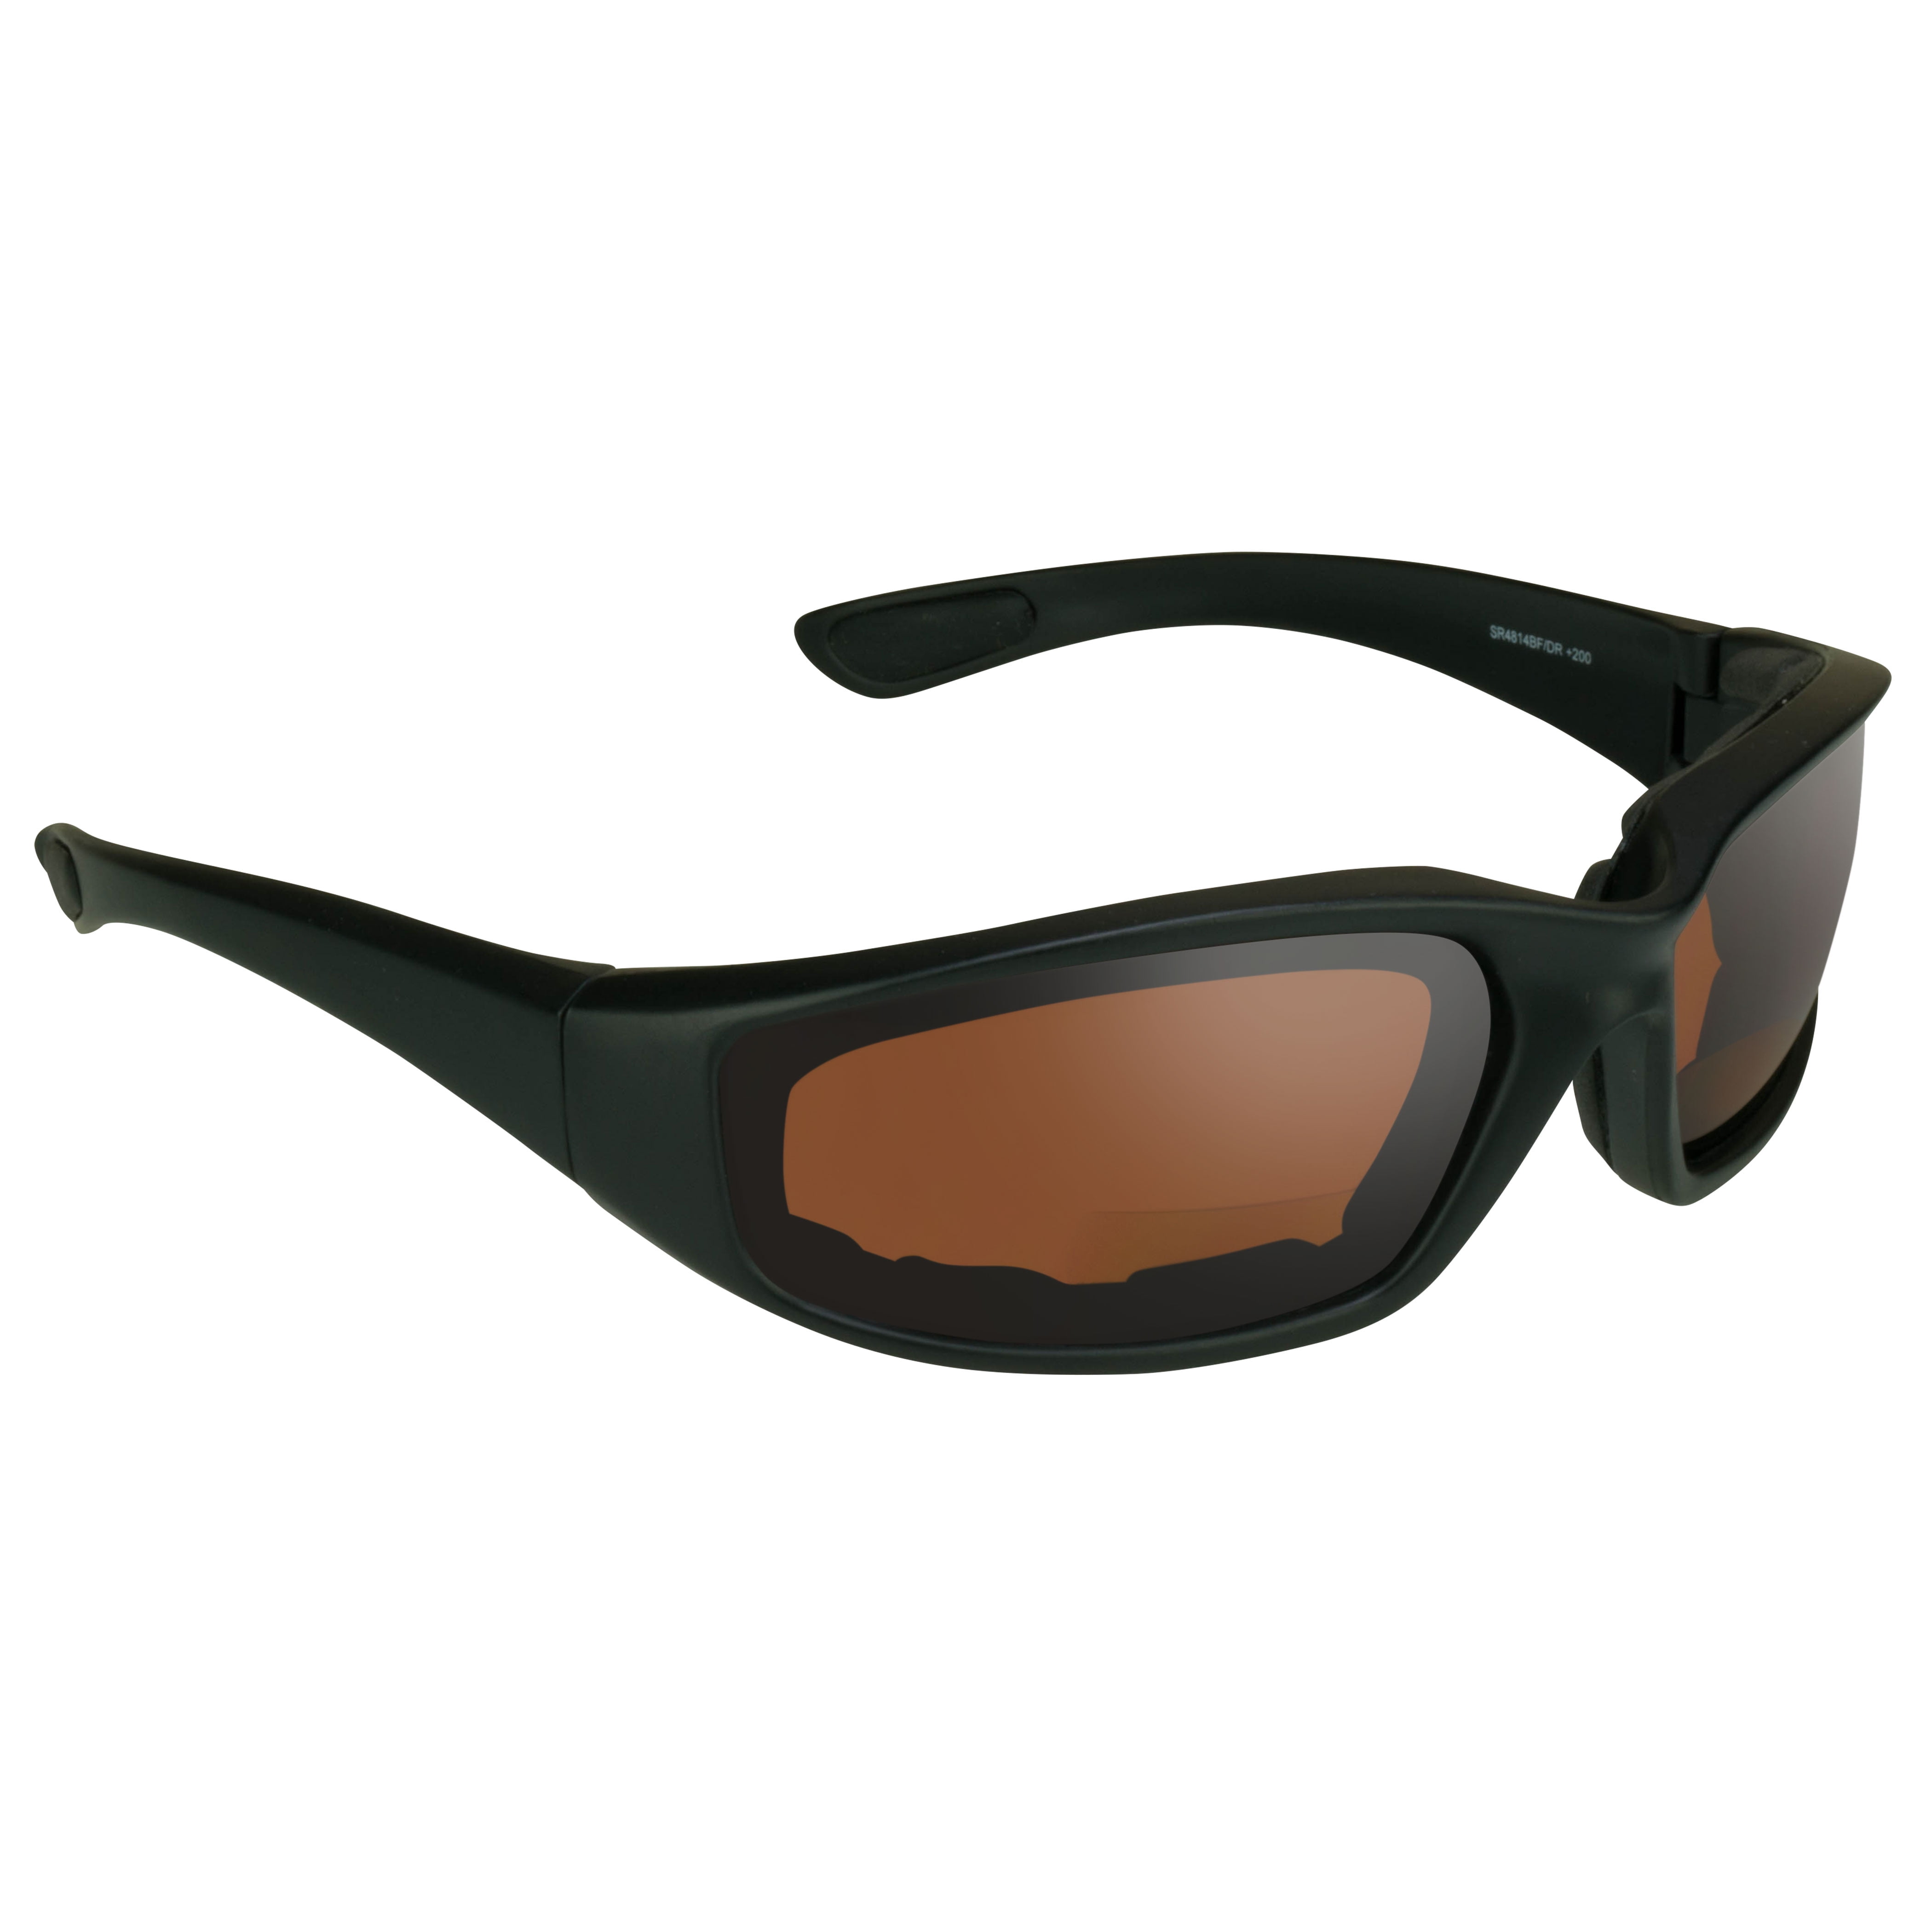 Bikershades Motorcycle SAFETY Bifocal Sunglass Z87 Foam Padded for Small to Medium Head Sizes. 